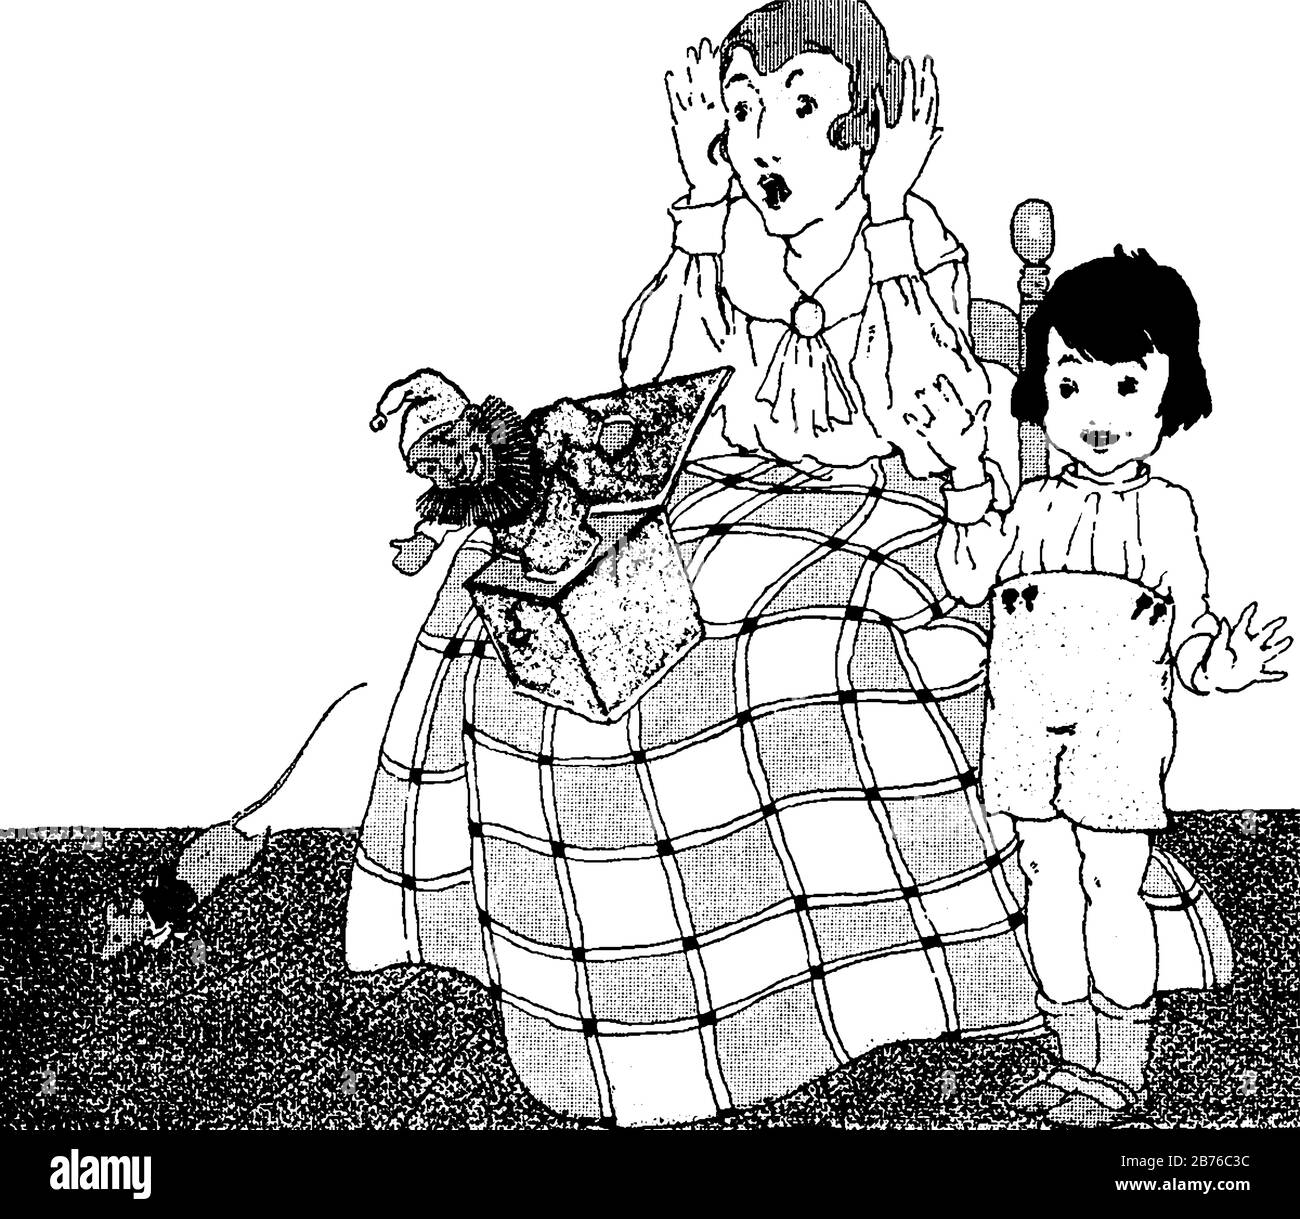 A female sitting on chair and child standing near her, mouse and joker came out from box which kept on her lap, she gets scared, vintage line drawing Stock Vector